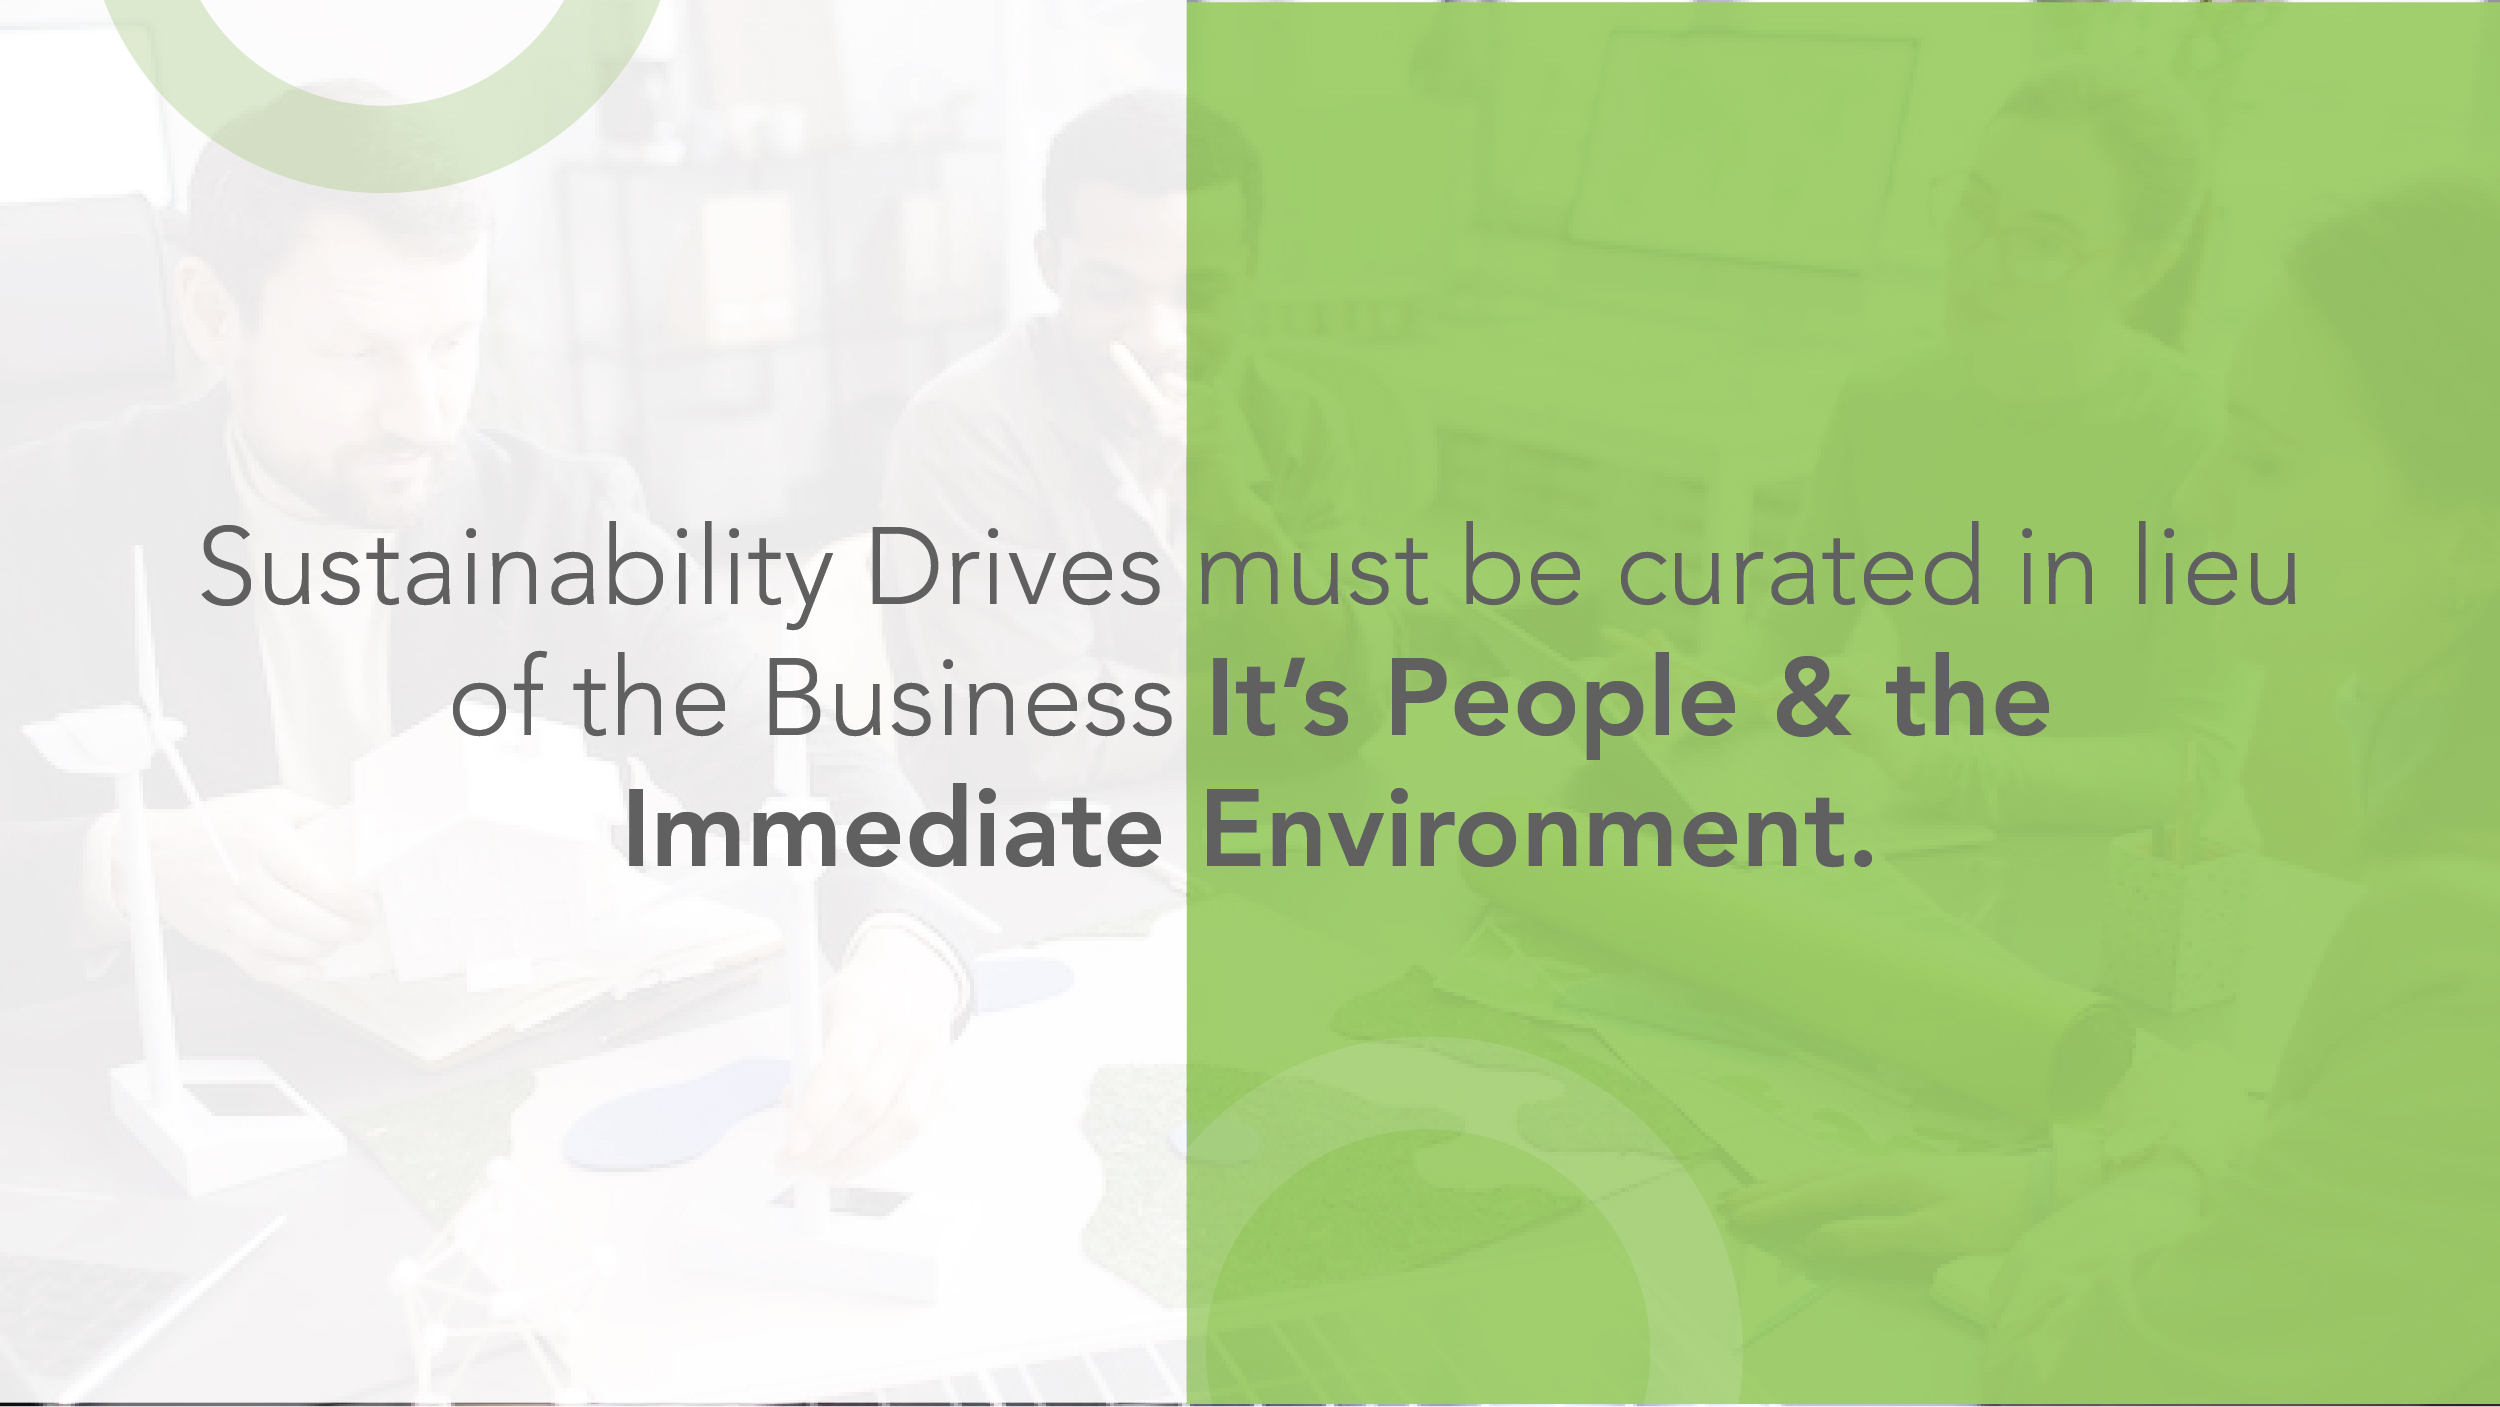 Sustainability Drives must be curated in lieu of the Business